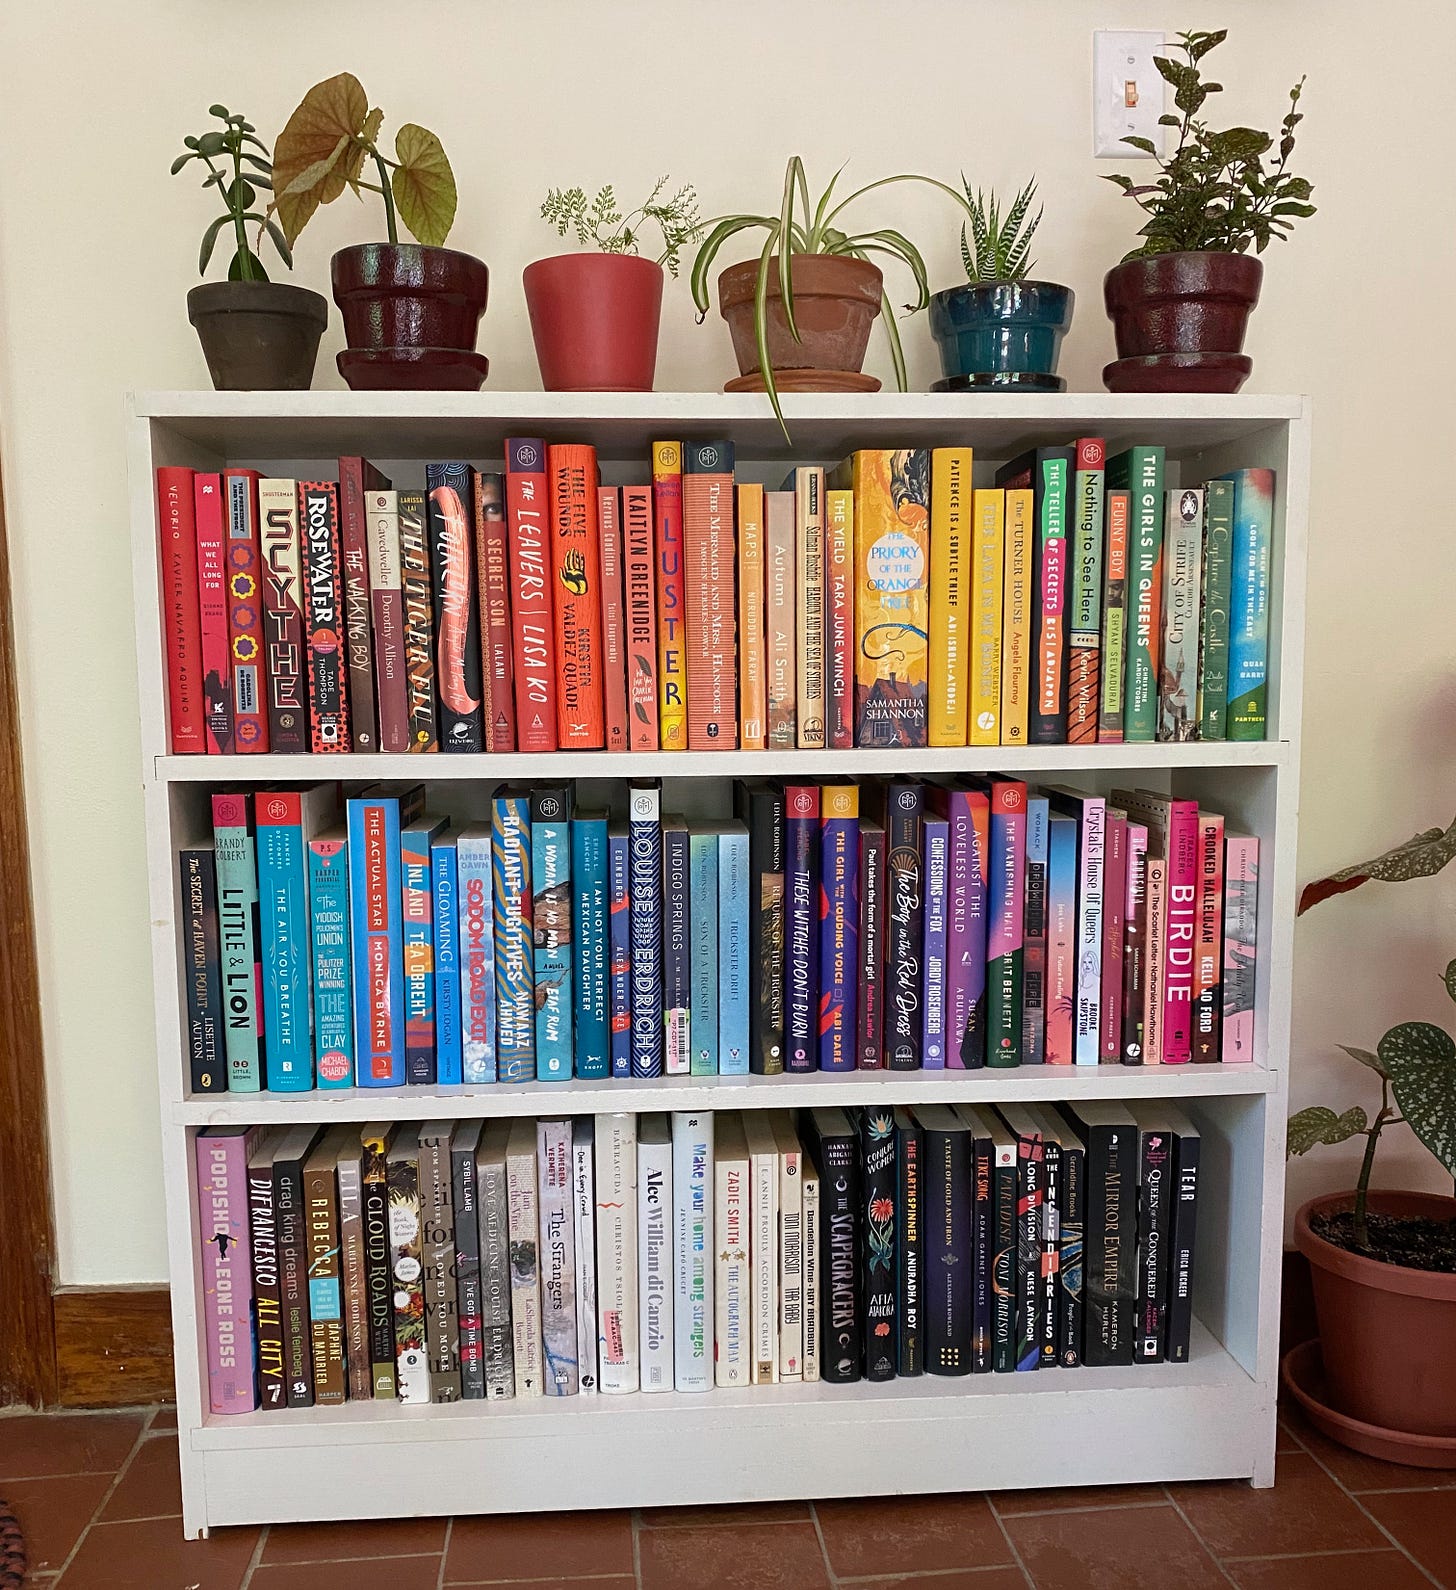 A white bookshelf filled with books organized in a rainbow pattern. Several small potted plants sit on top.